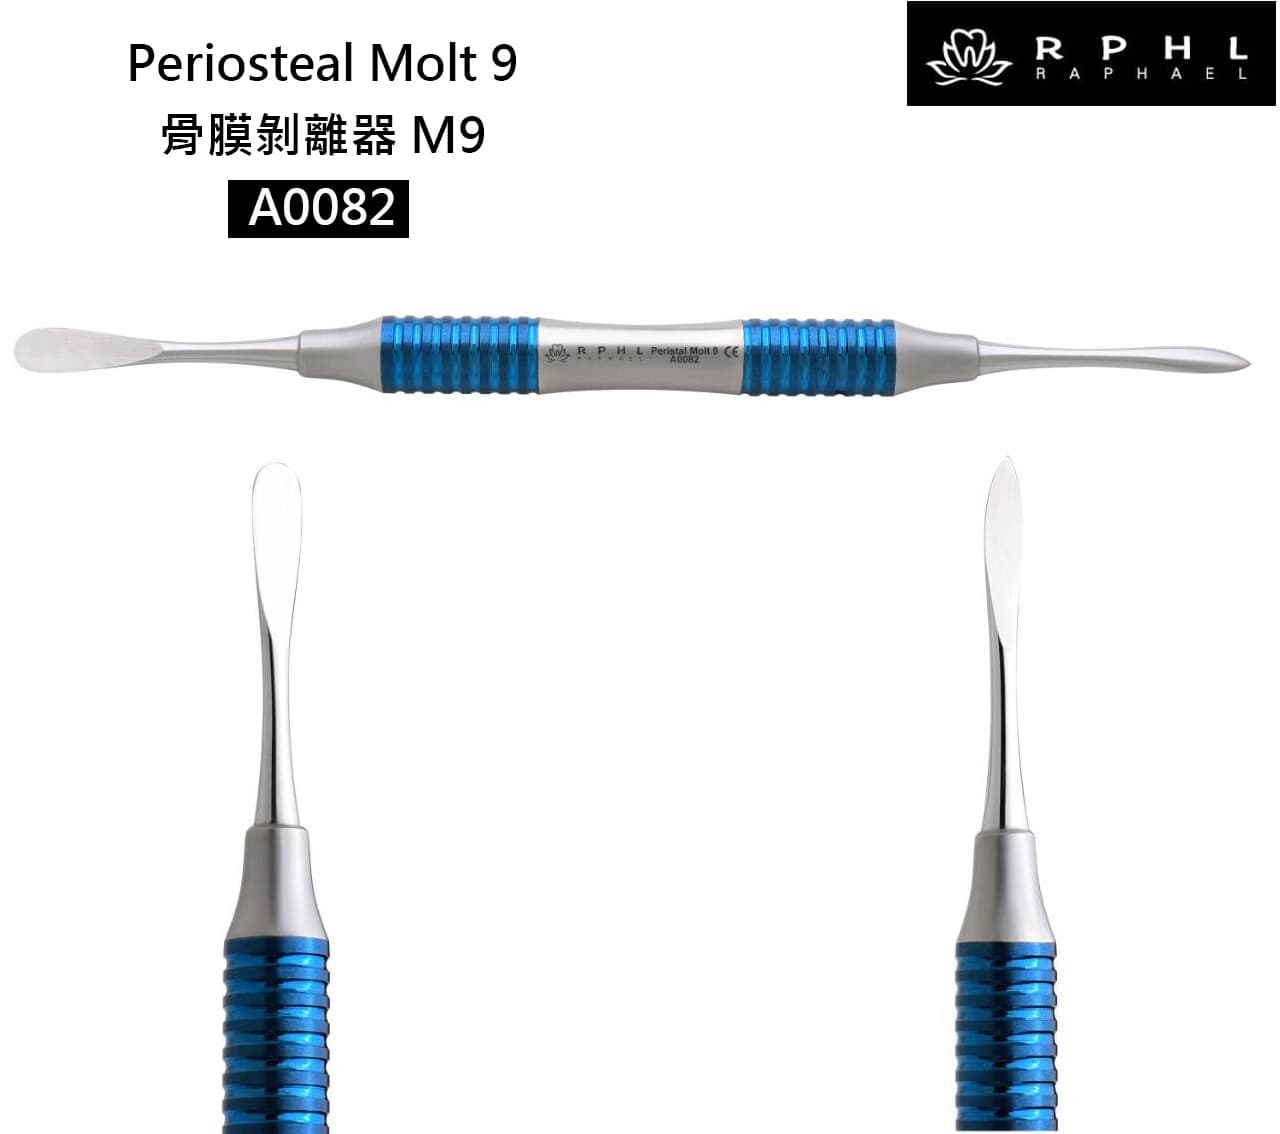 A0082 Periosteal M9 骨膜 剝離器 perio 牙周 elevator molt surgical P9